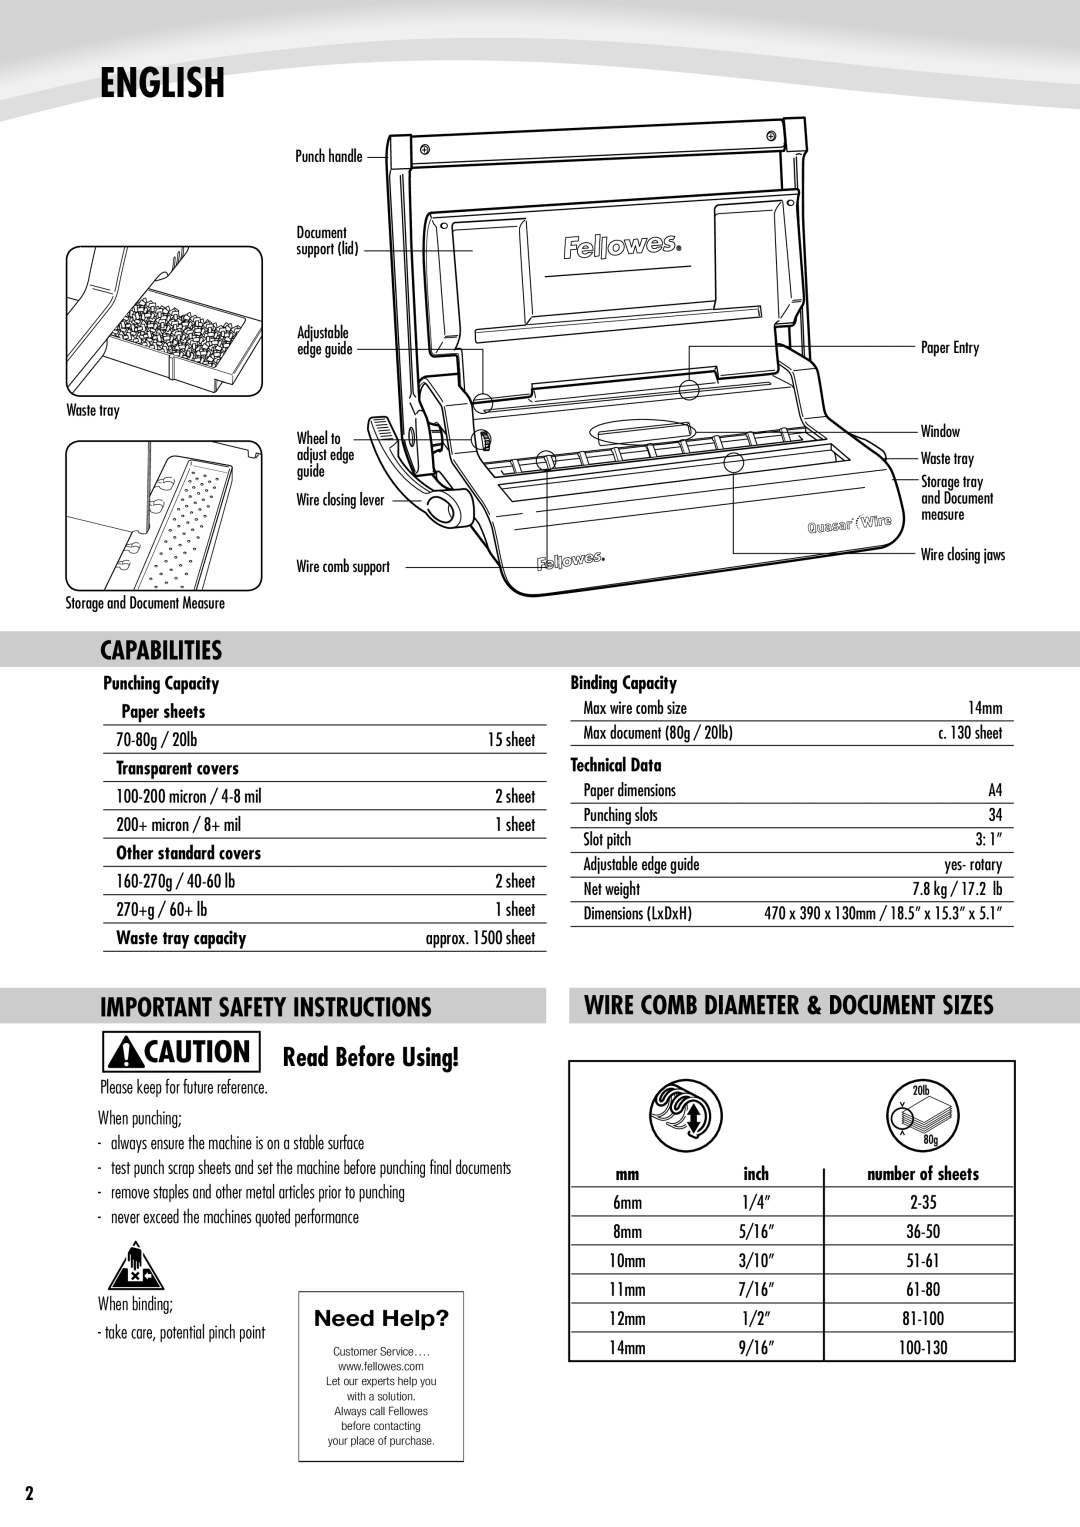 Fellowes 403054 Capabilities, IMPORTANT SAFETY INSTRUCTIONS Read Before Using, Wire Comb Diameter & Document Sizes, inch 